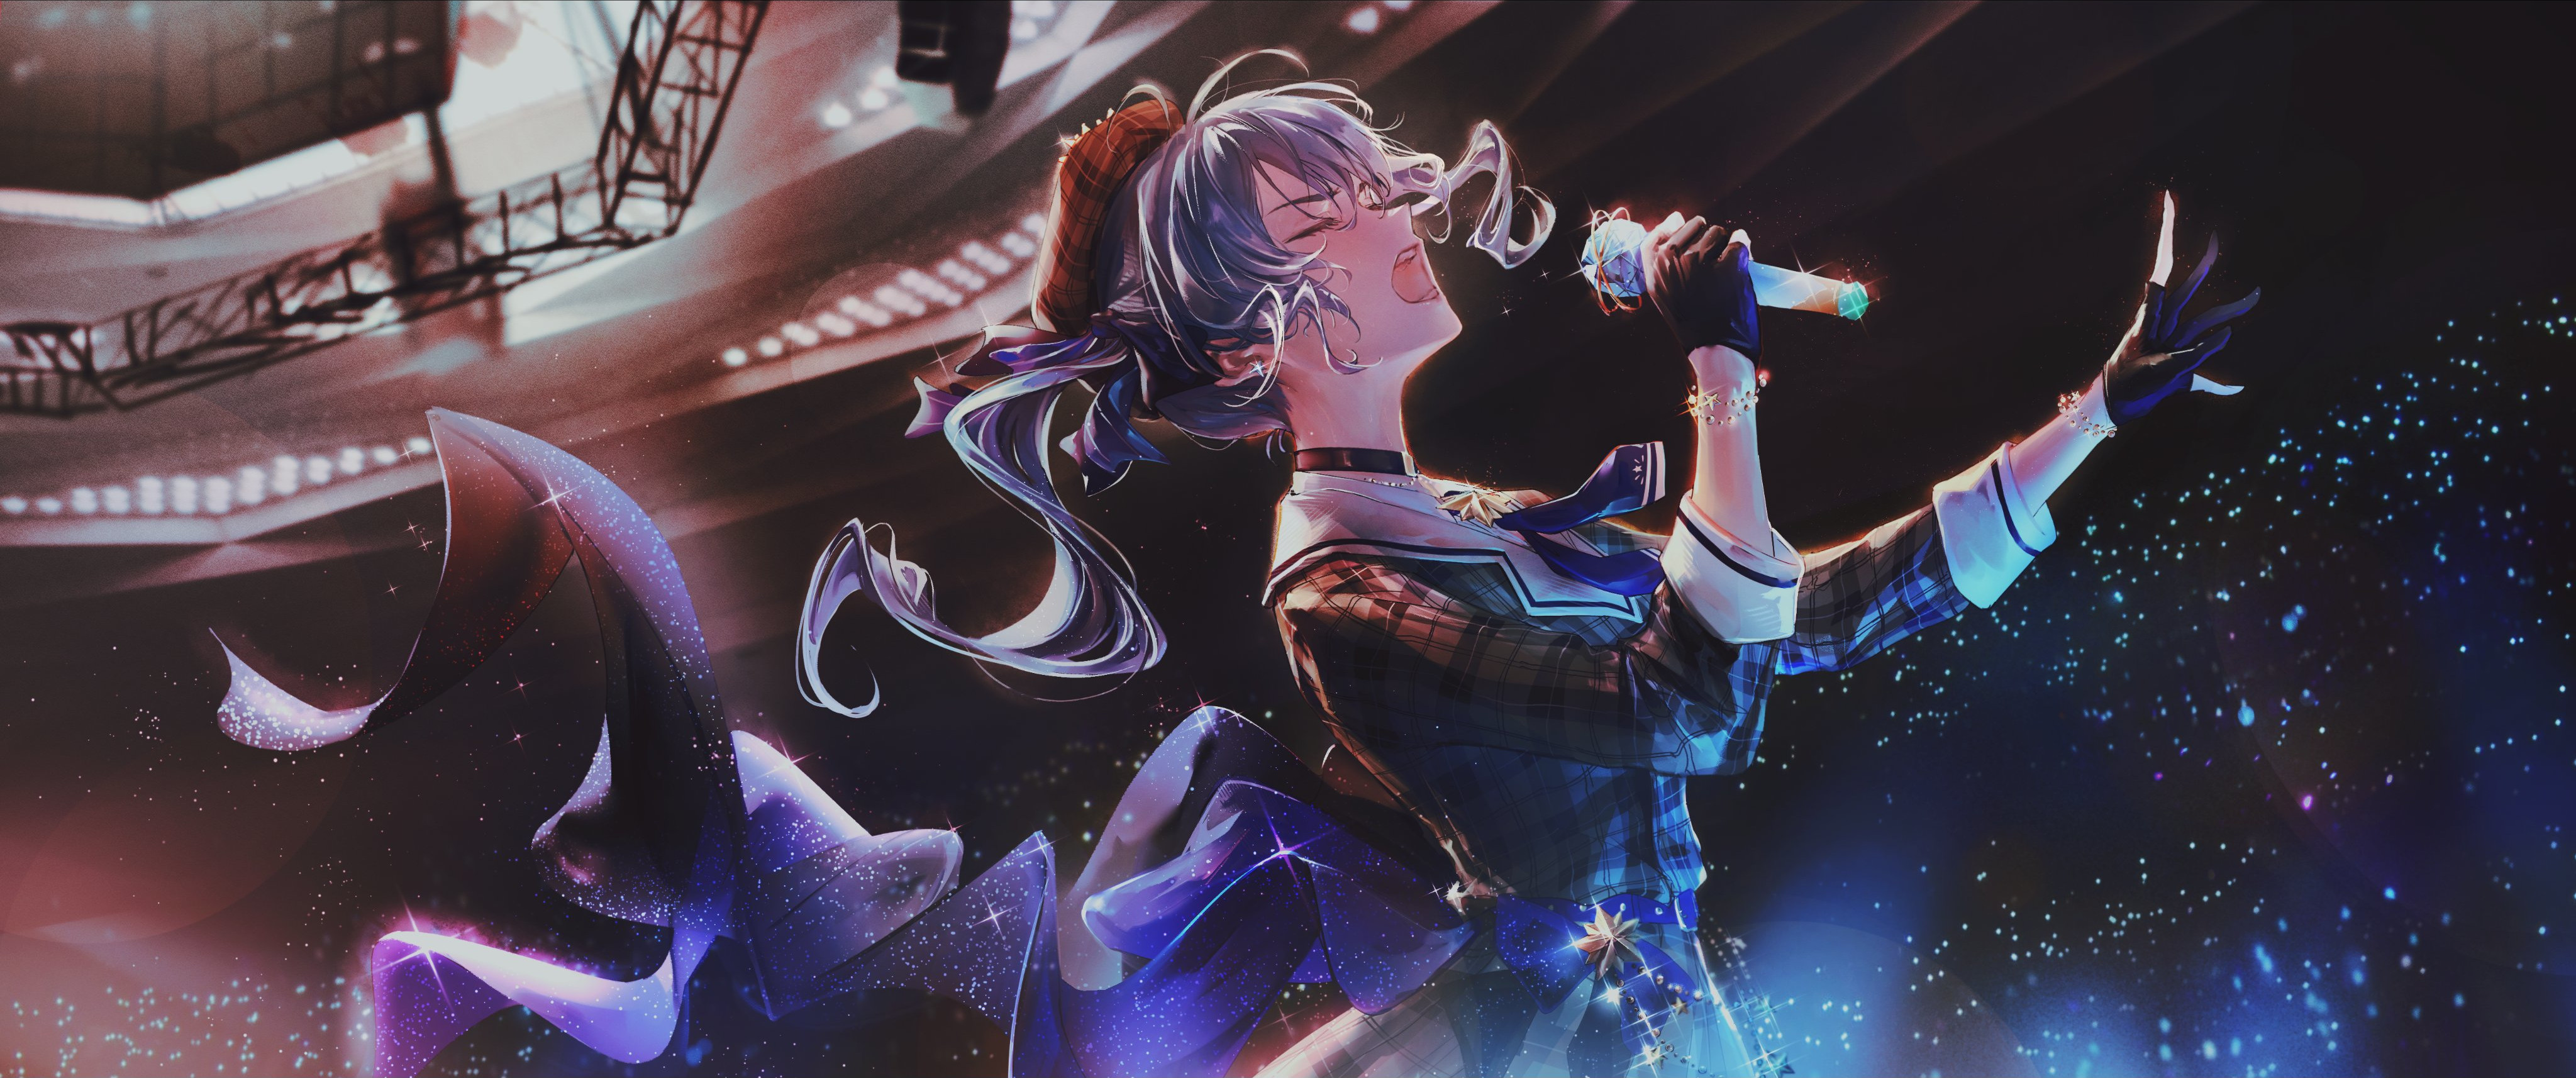 Virtual Youtuber Hololive Hoshimachi Suisei Singer Stages Hyde Artist Anime Girls Singing Microphone 4096x1714